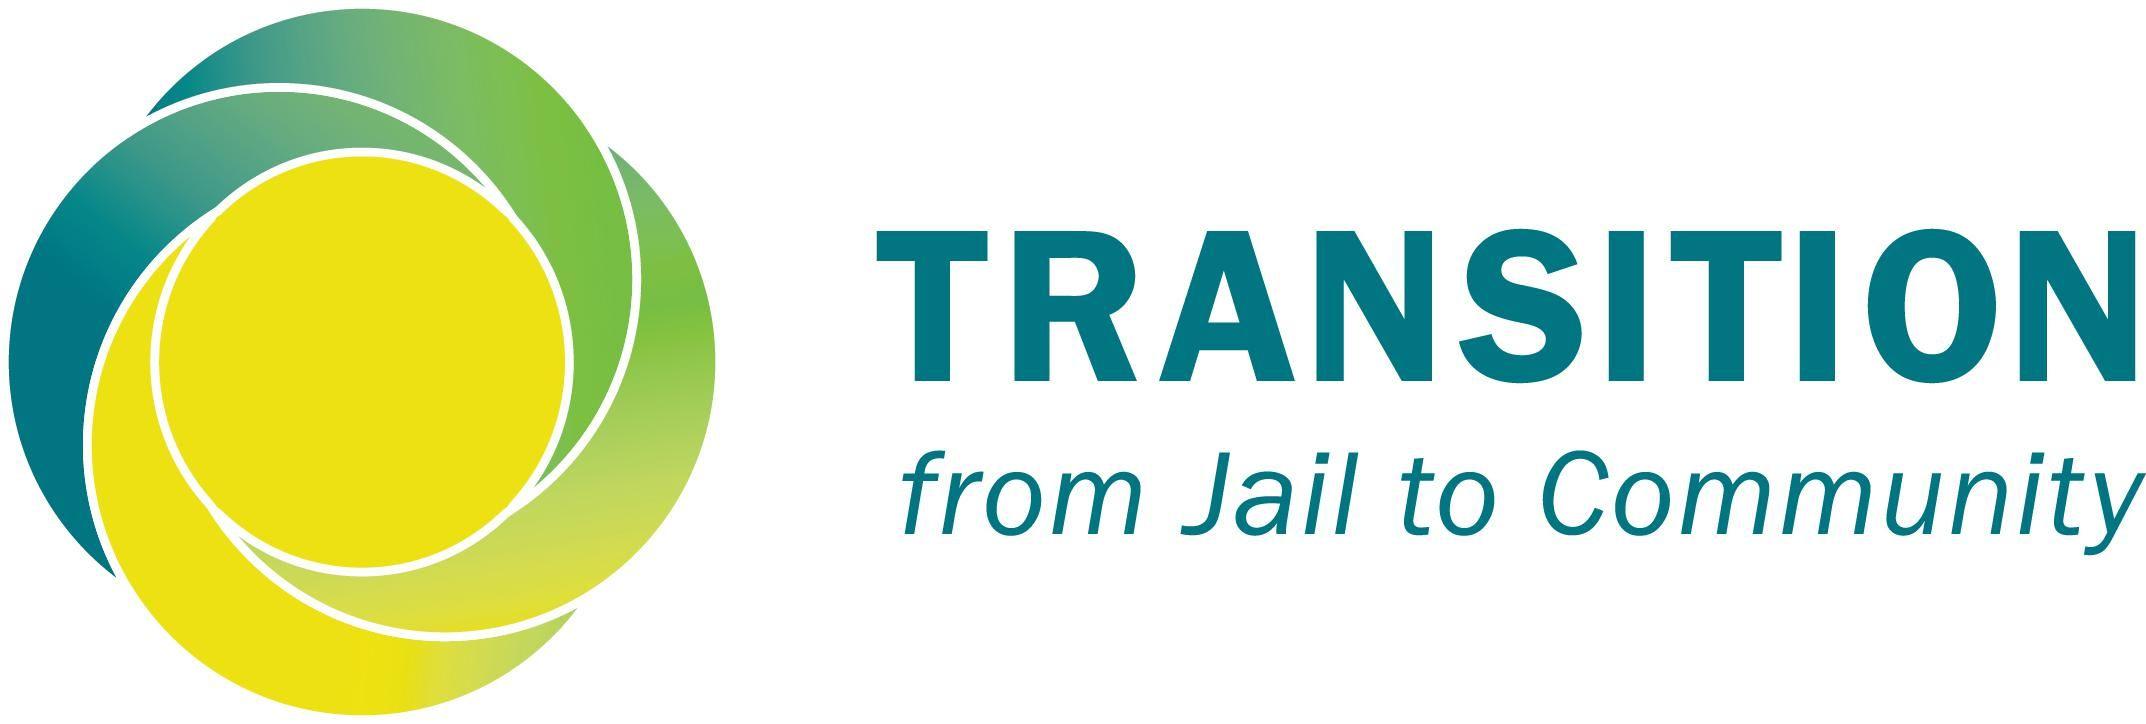 TJC Logo - Transition from Jail to Community (TJC)